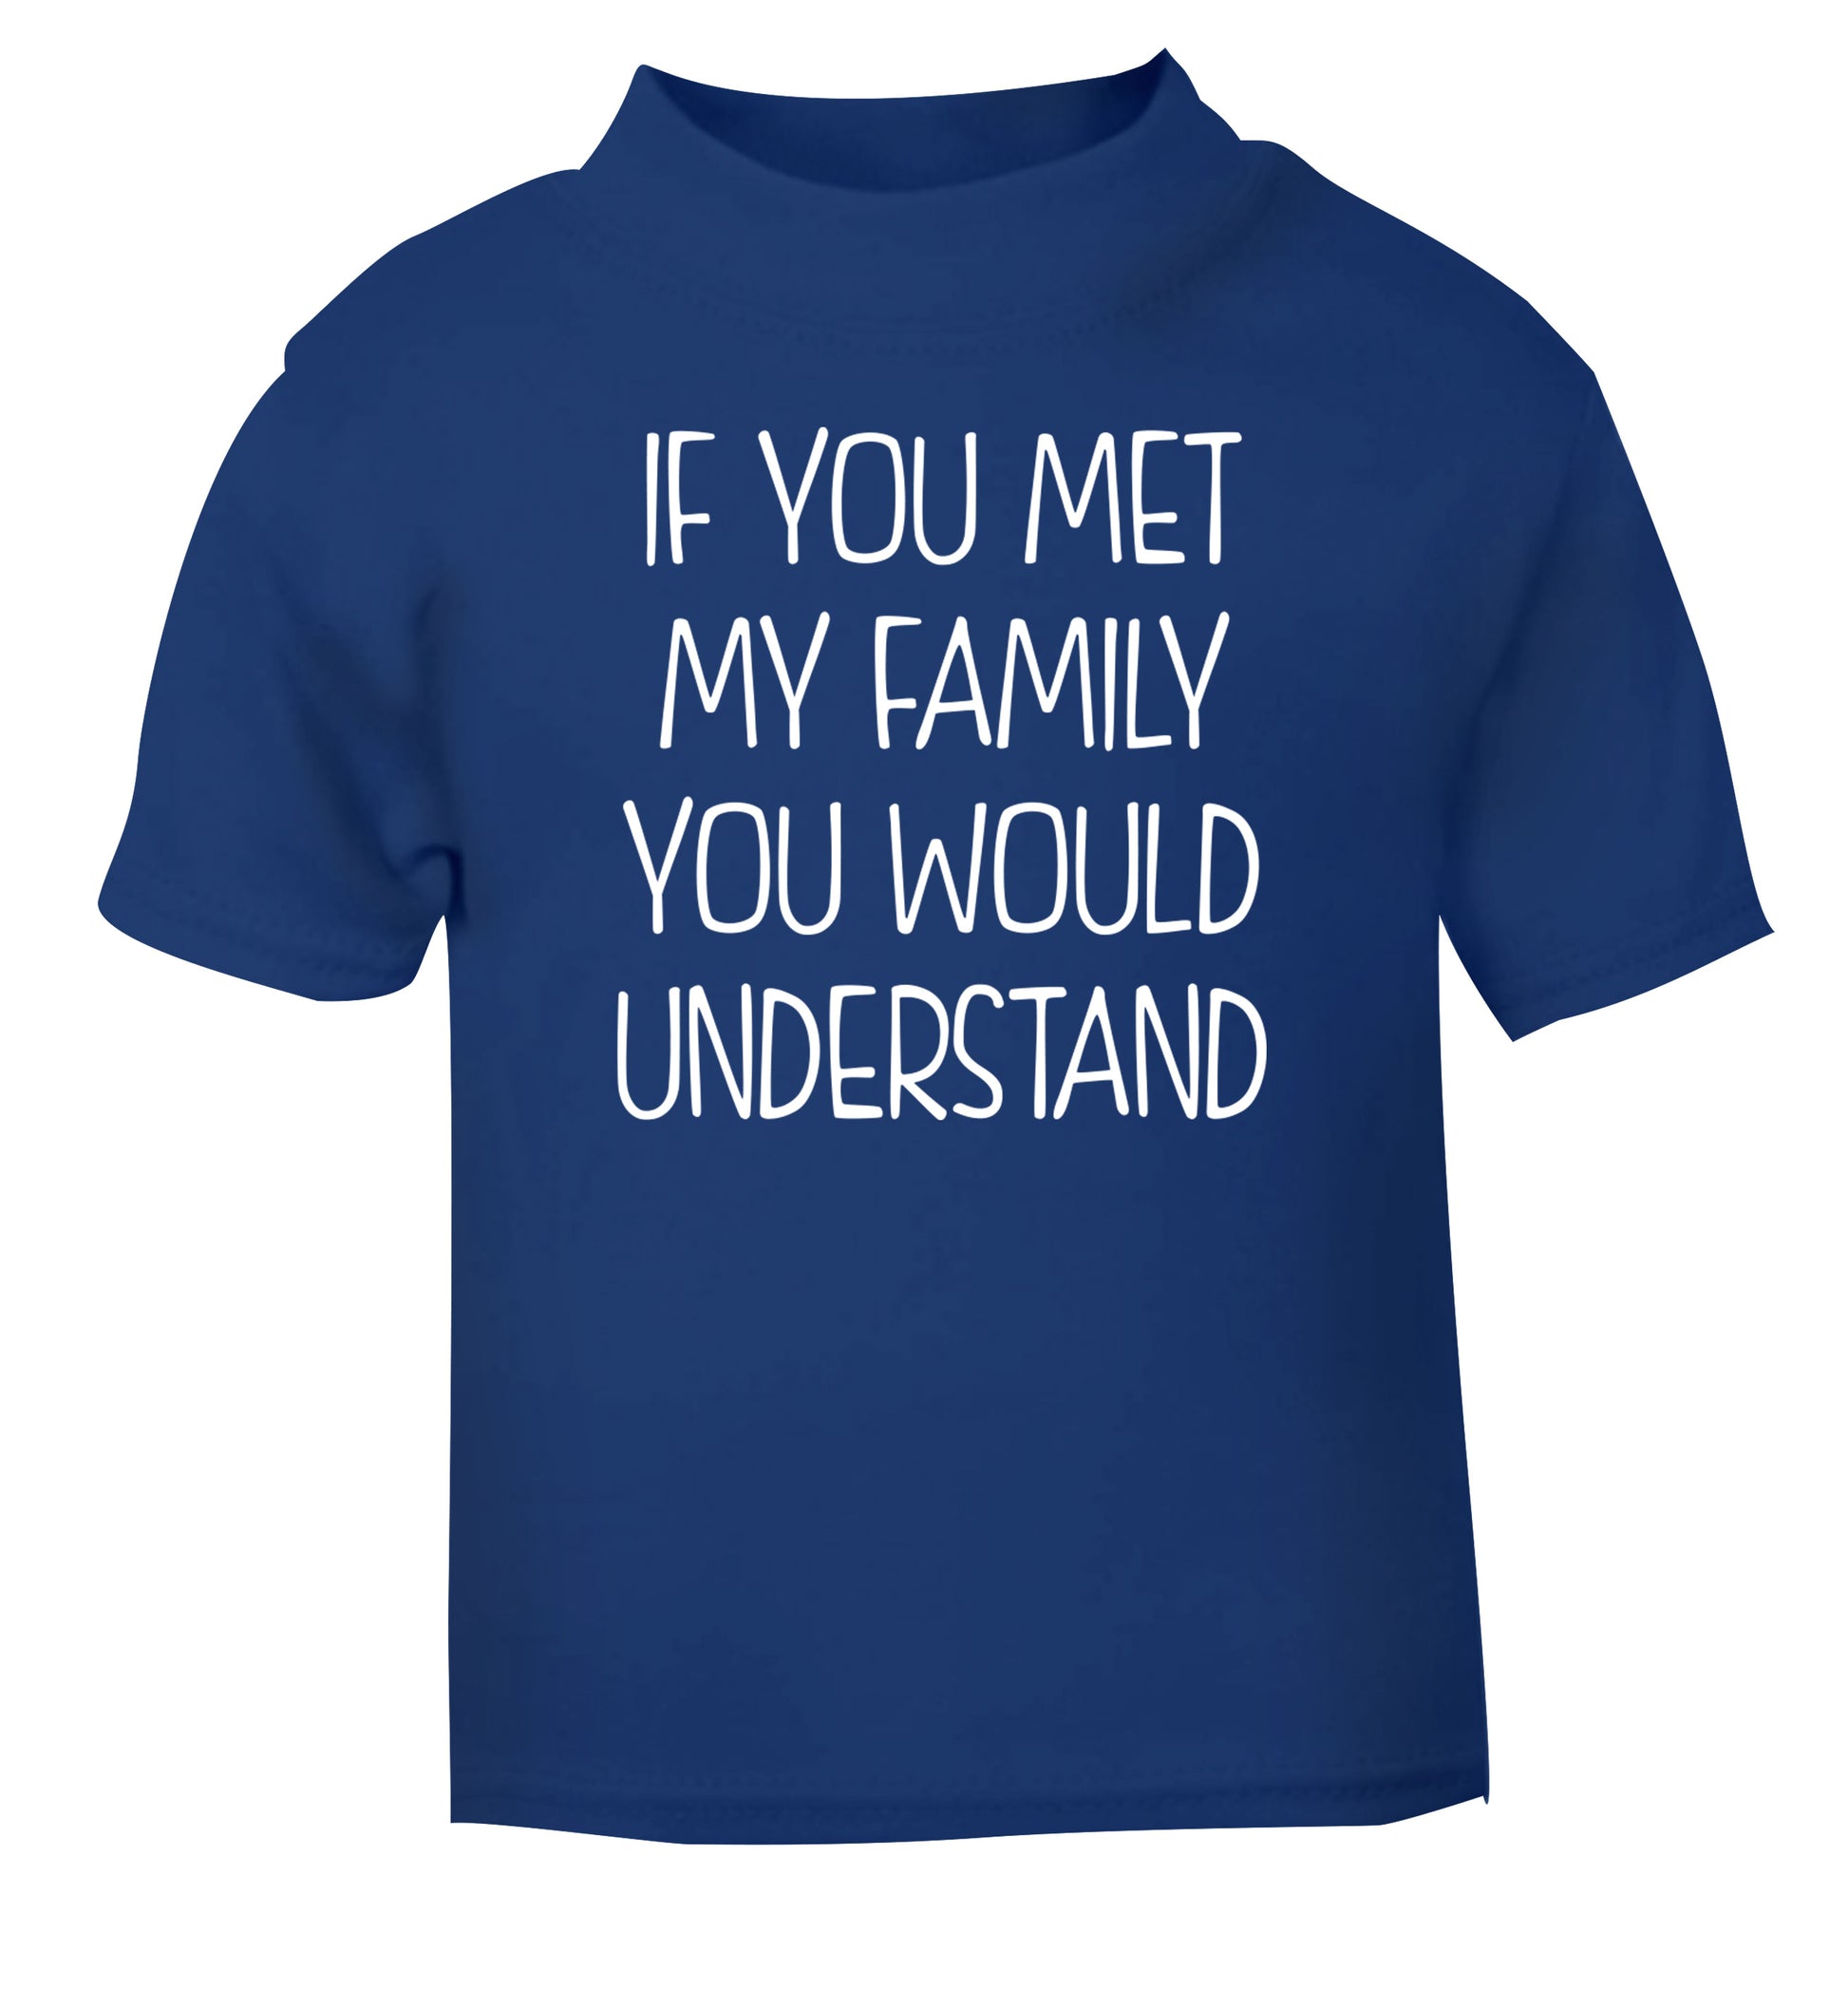 If you met my family you would understand blue Baby Toddler Tshirt 2 Years